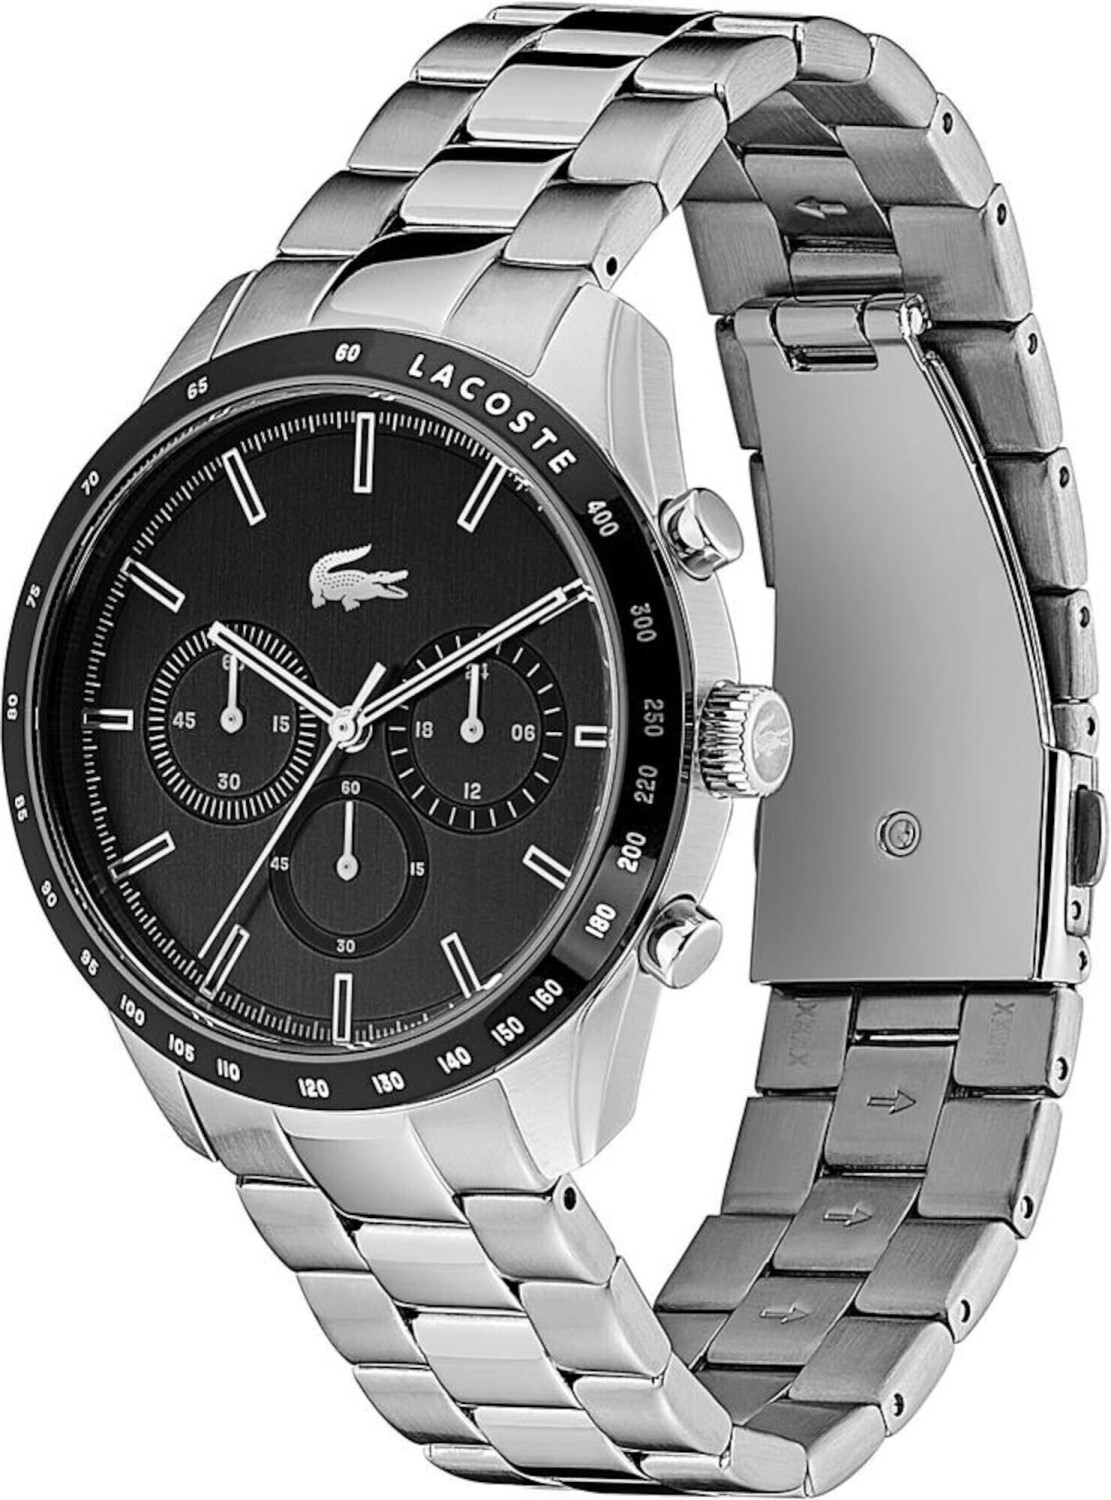 Buy Lacoste Boston Chronograph from on £122.42 – Best (Today) Deals